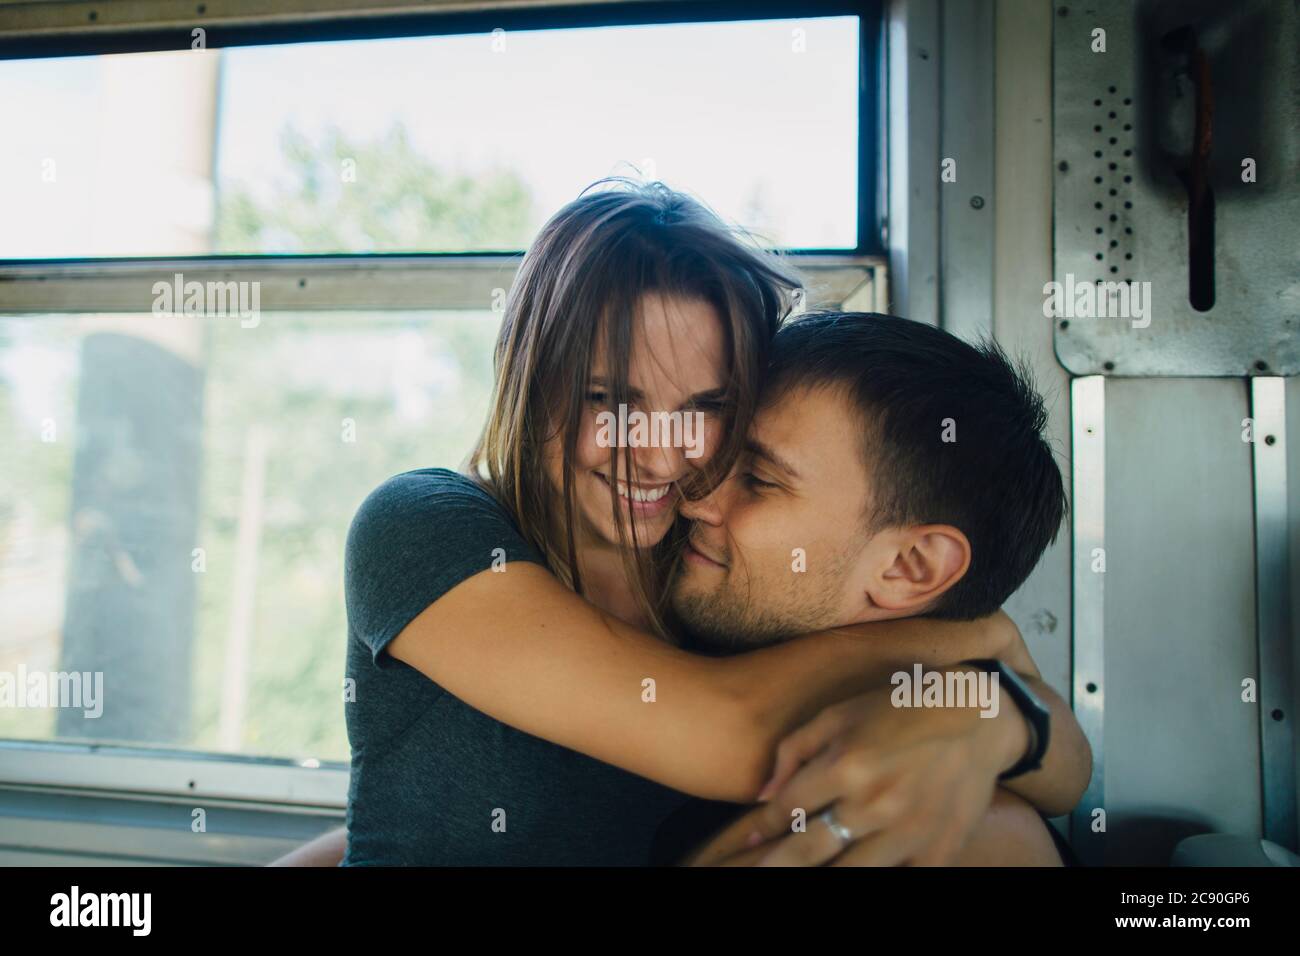 Couple embracing on train Banque D'Images